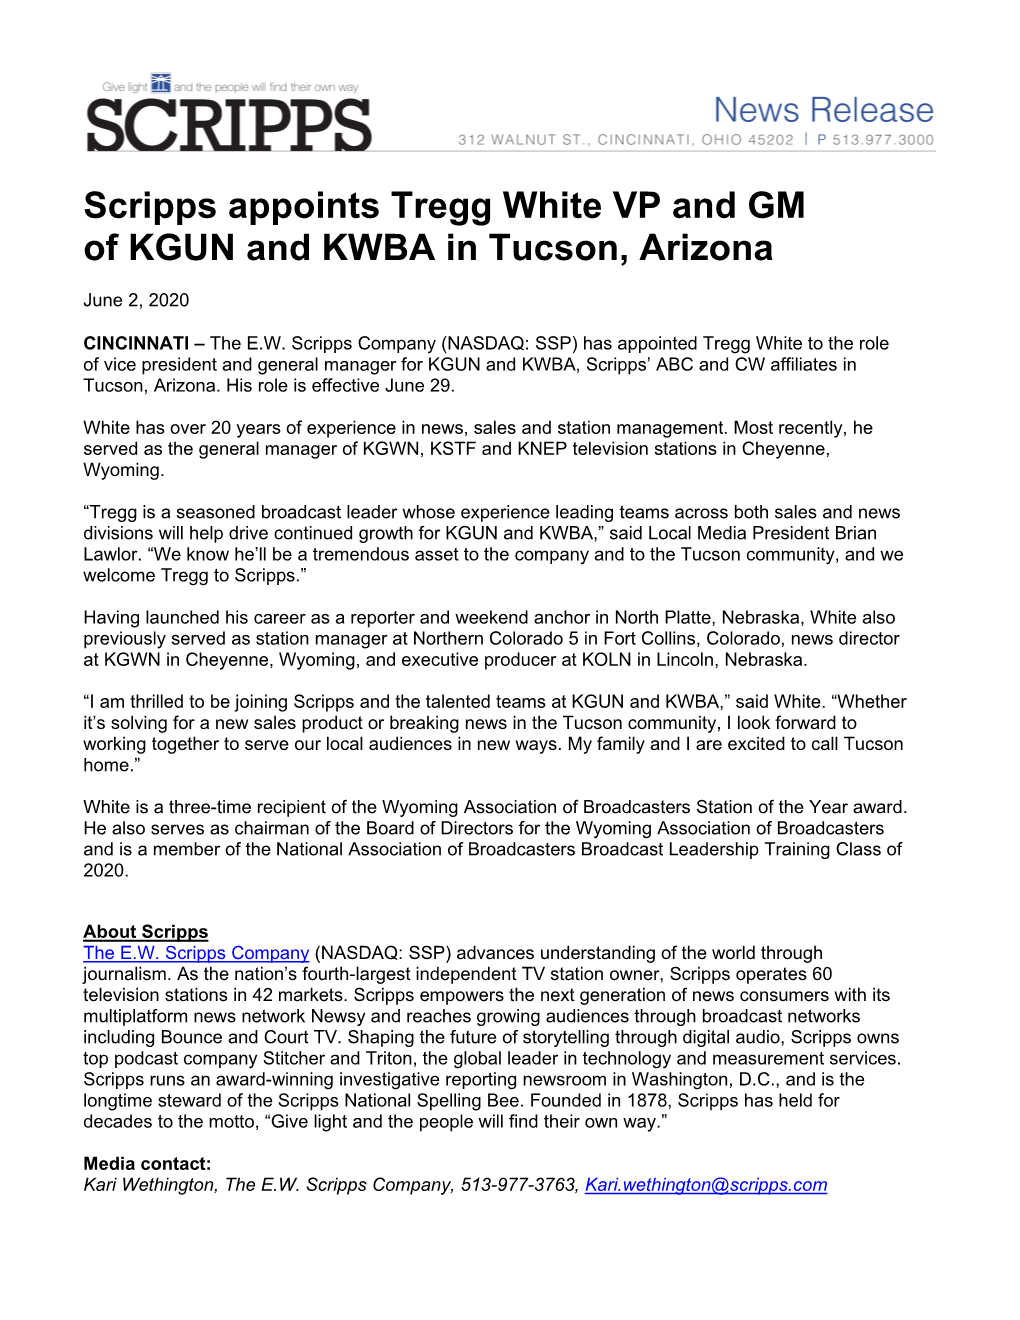 Scripps Appoints Tregg White VP and GM of KGUN and KWBA in Tucson, Arizona